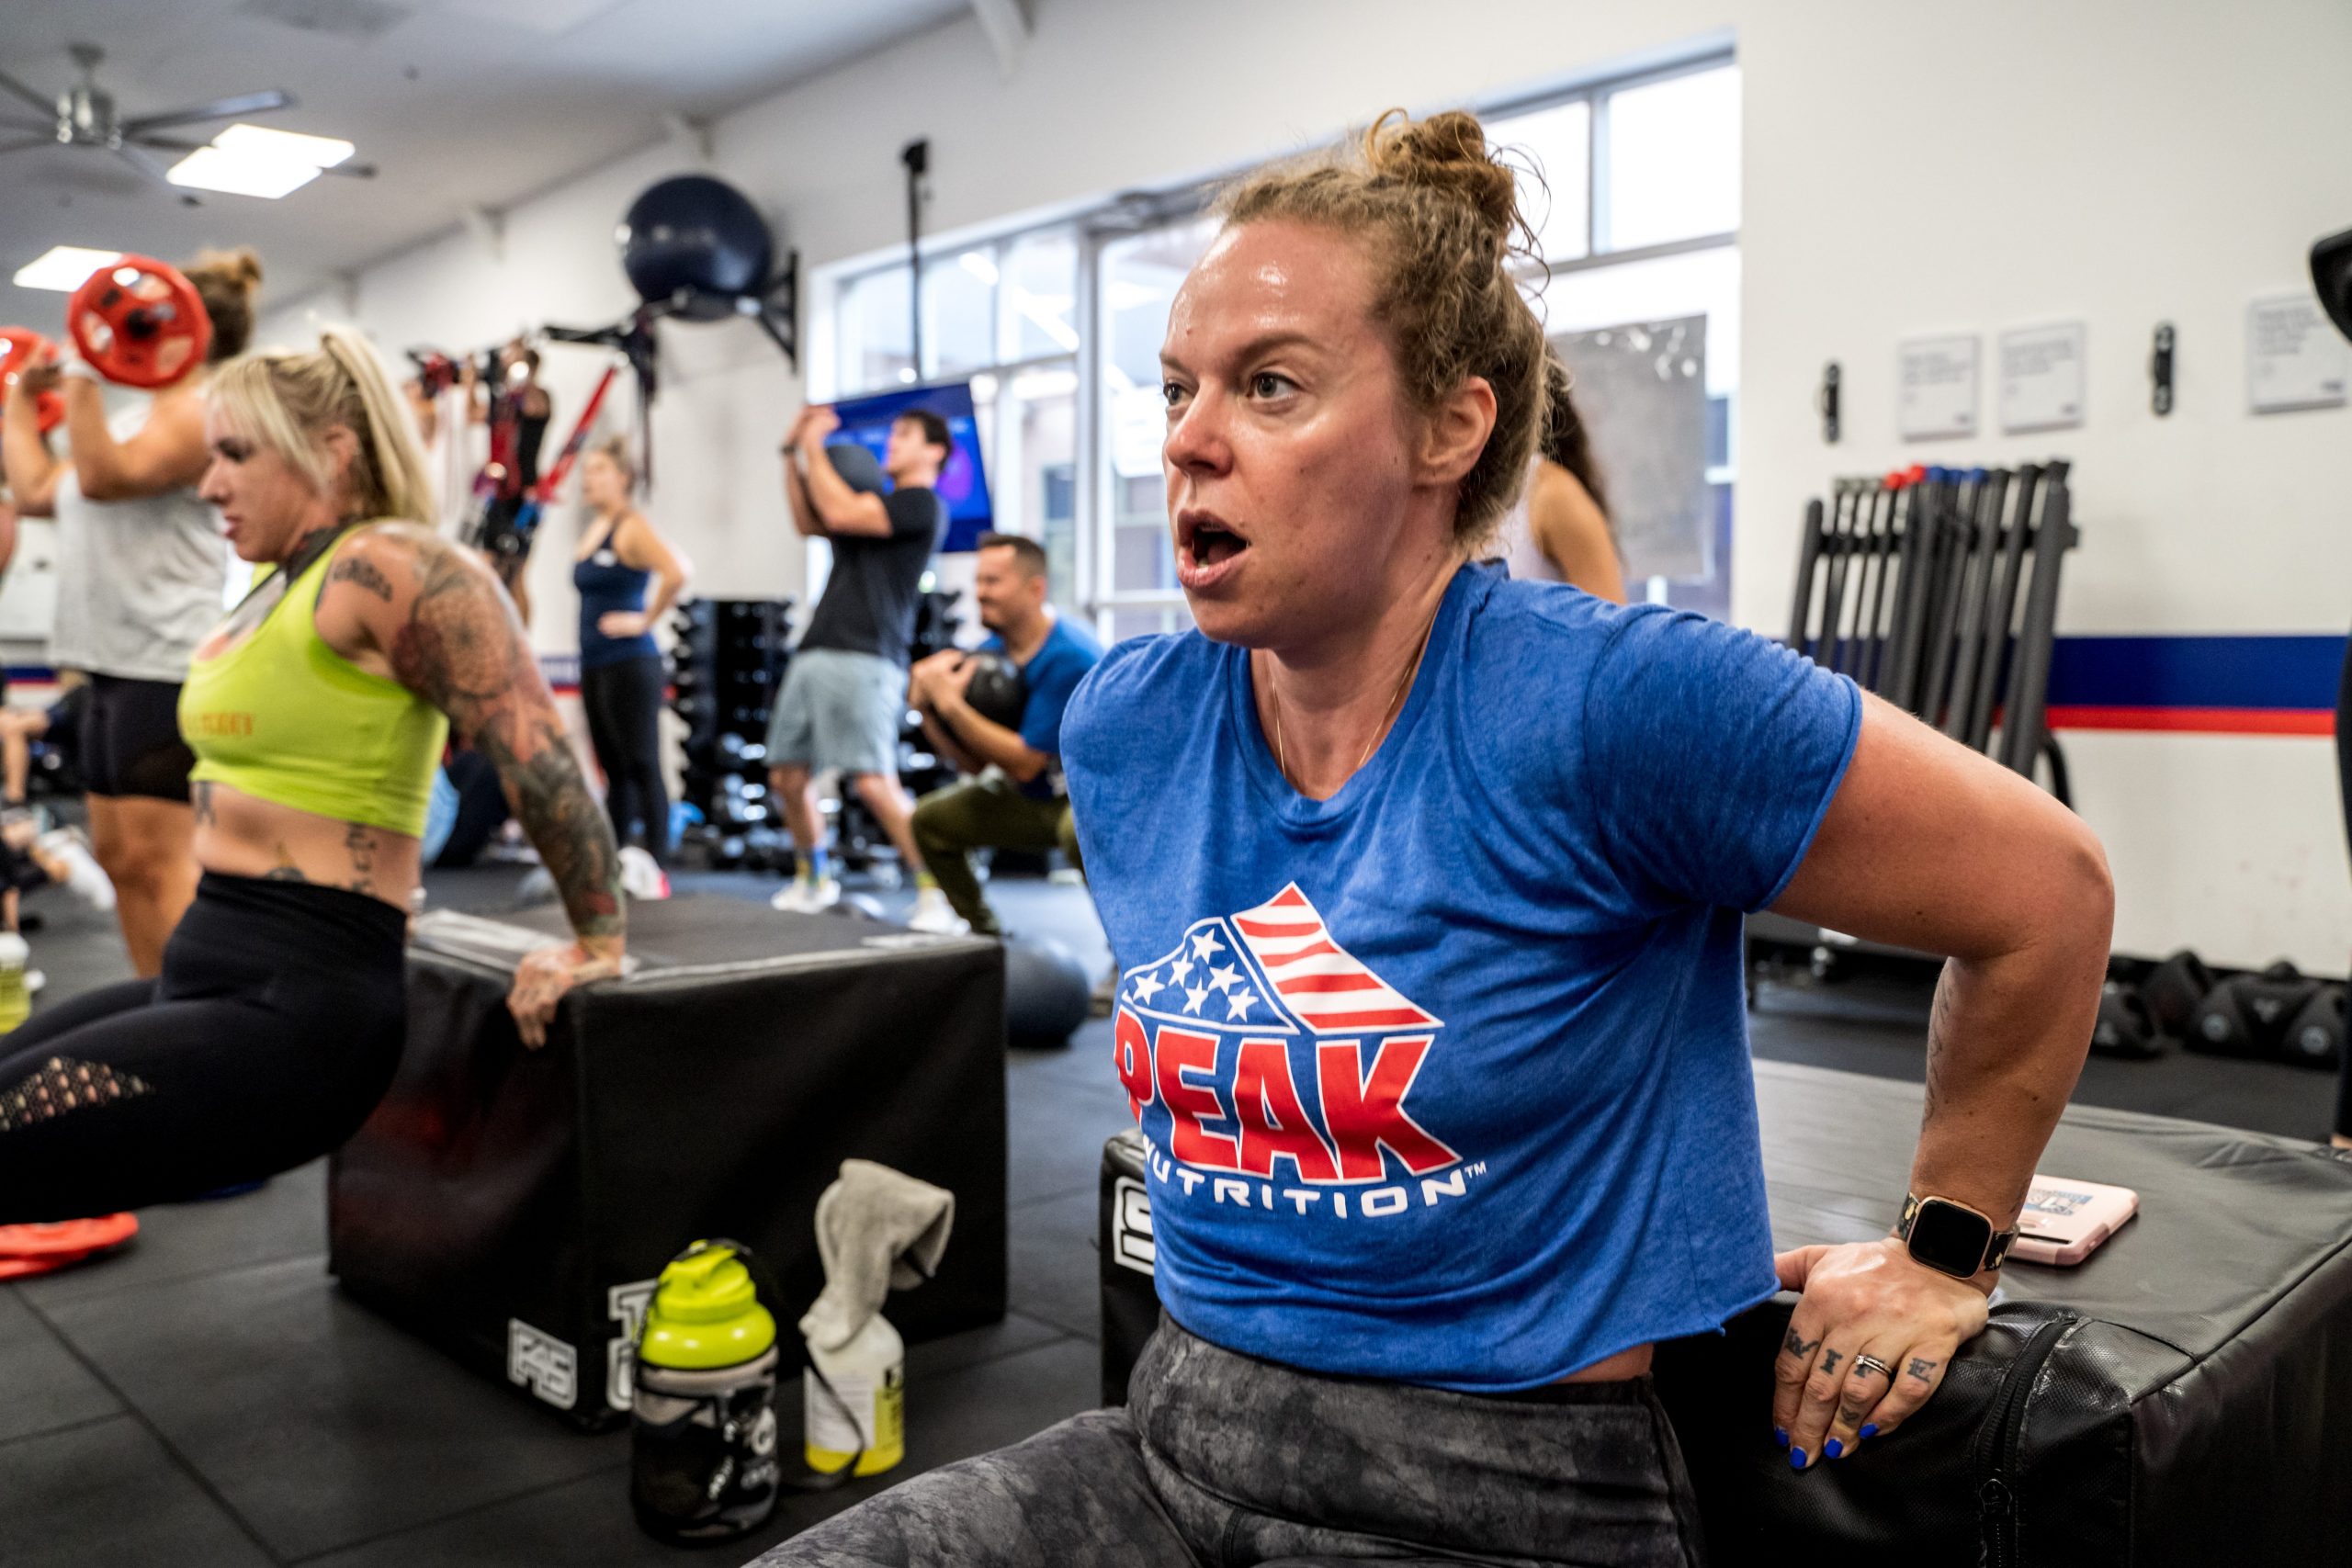 woman working out in blue shirt